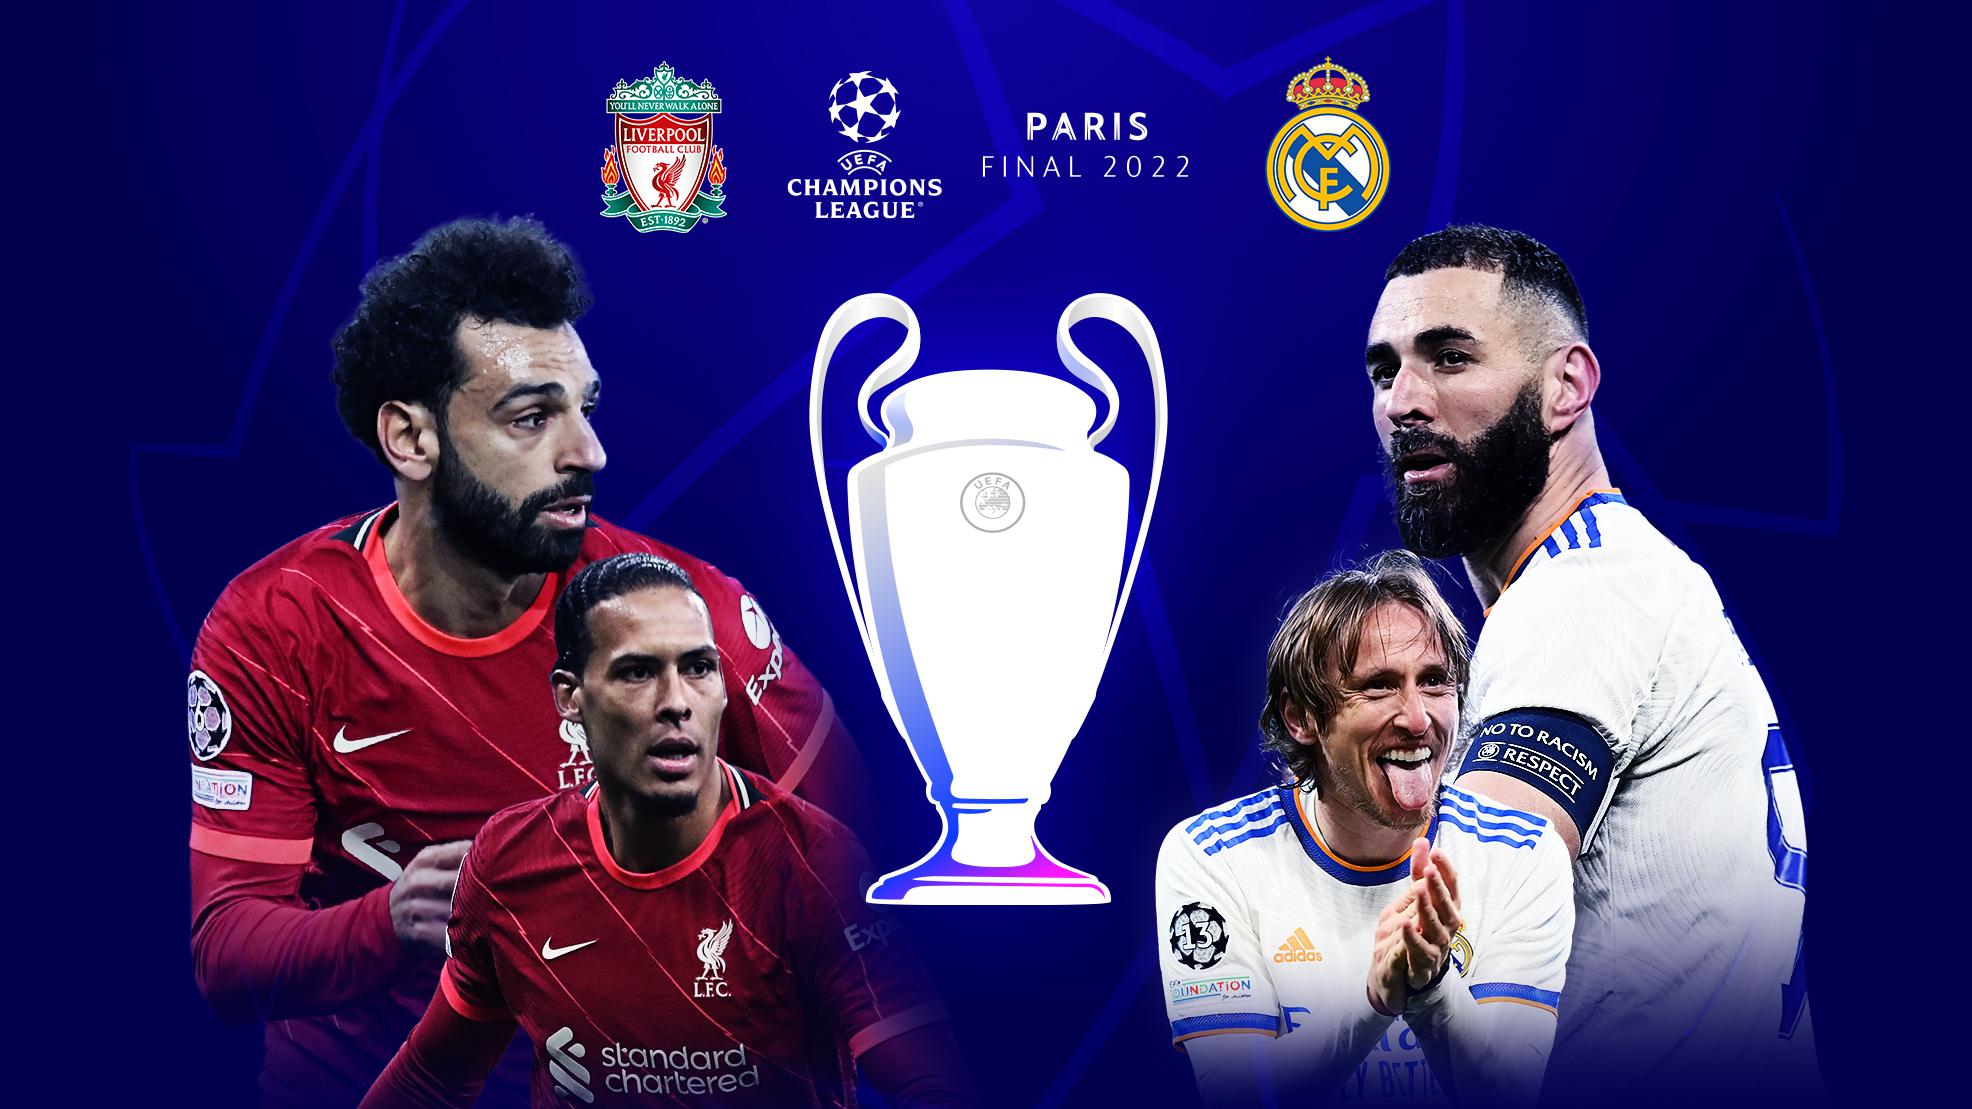 Champions League final preview: Liverpool vs Real Madrid – where to watch, kick-off time, possible line-ups, form guide | UEFA.com